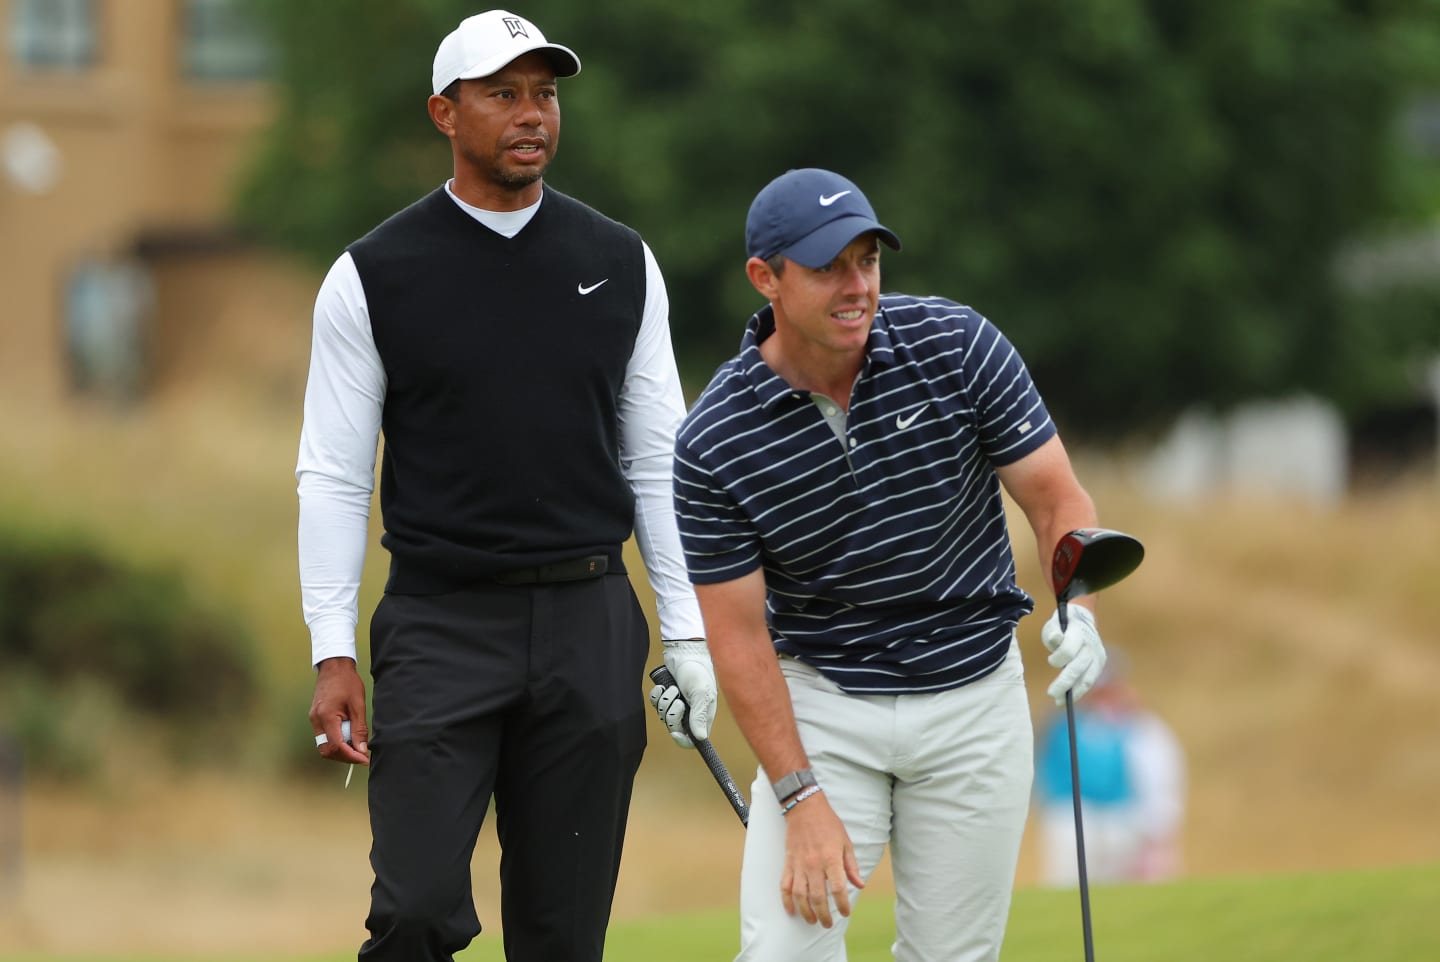 R&A Issues Honorary Memberships to Tiger, Rory & Lawrie